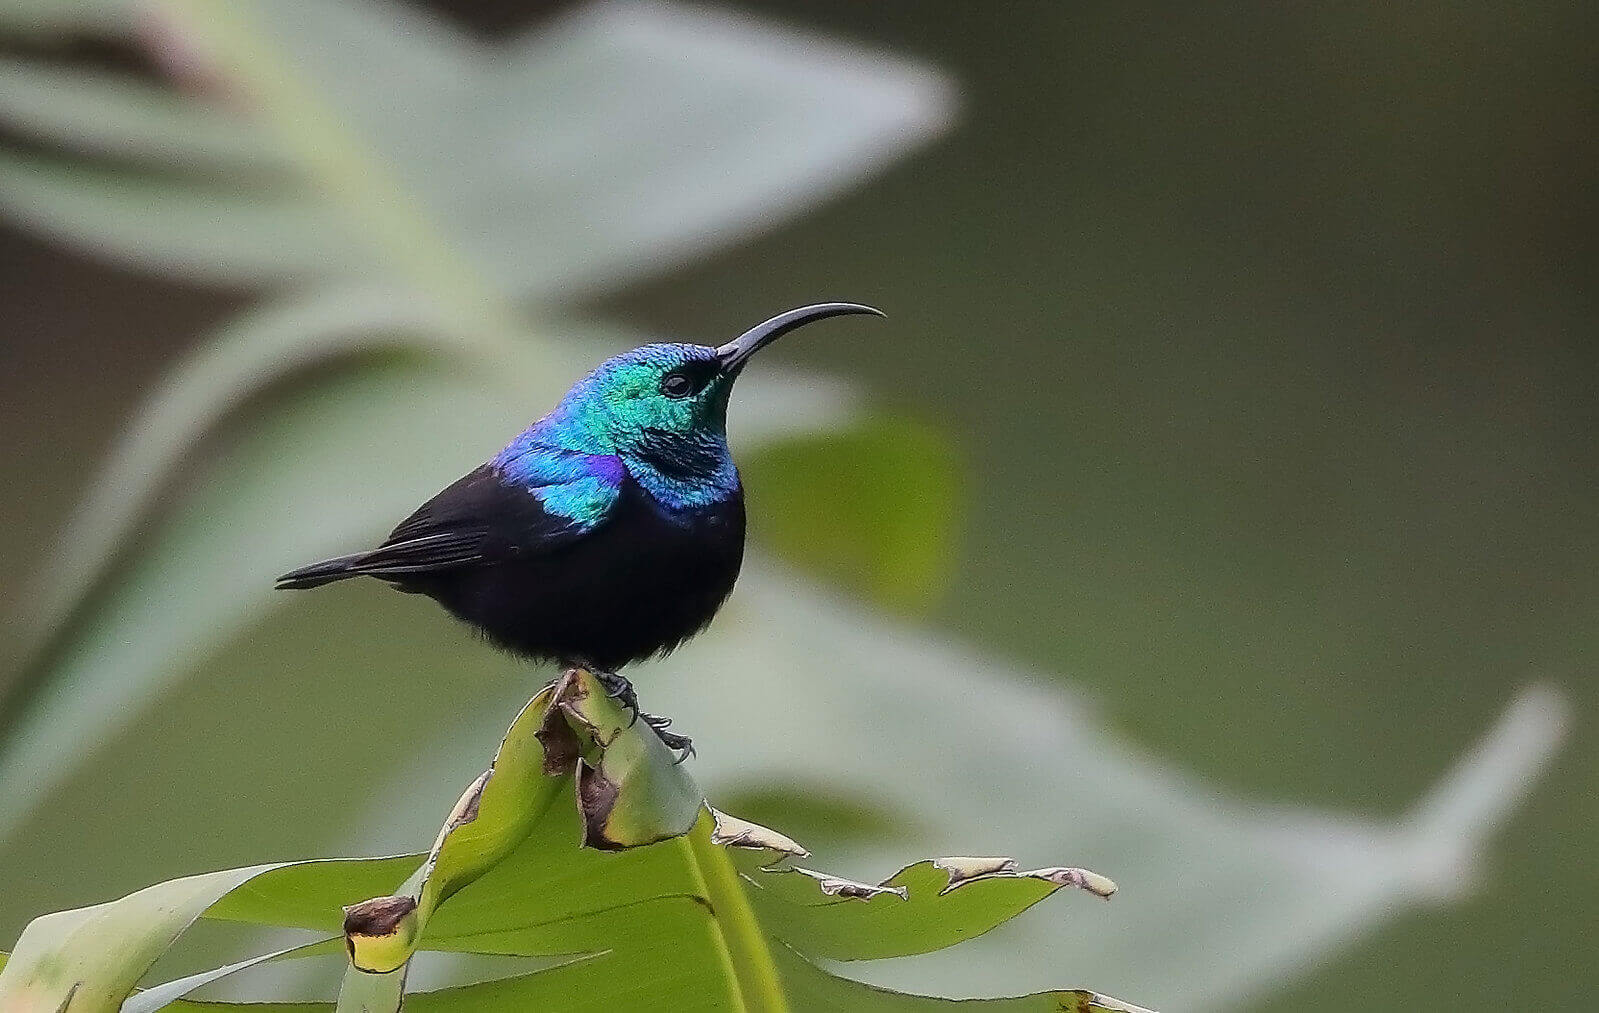 The Malagasy green sunbird is a beautiful sunbird, with a long, curved bill, and iridescent blue and green colouring